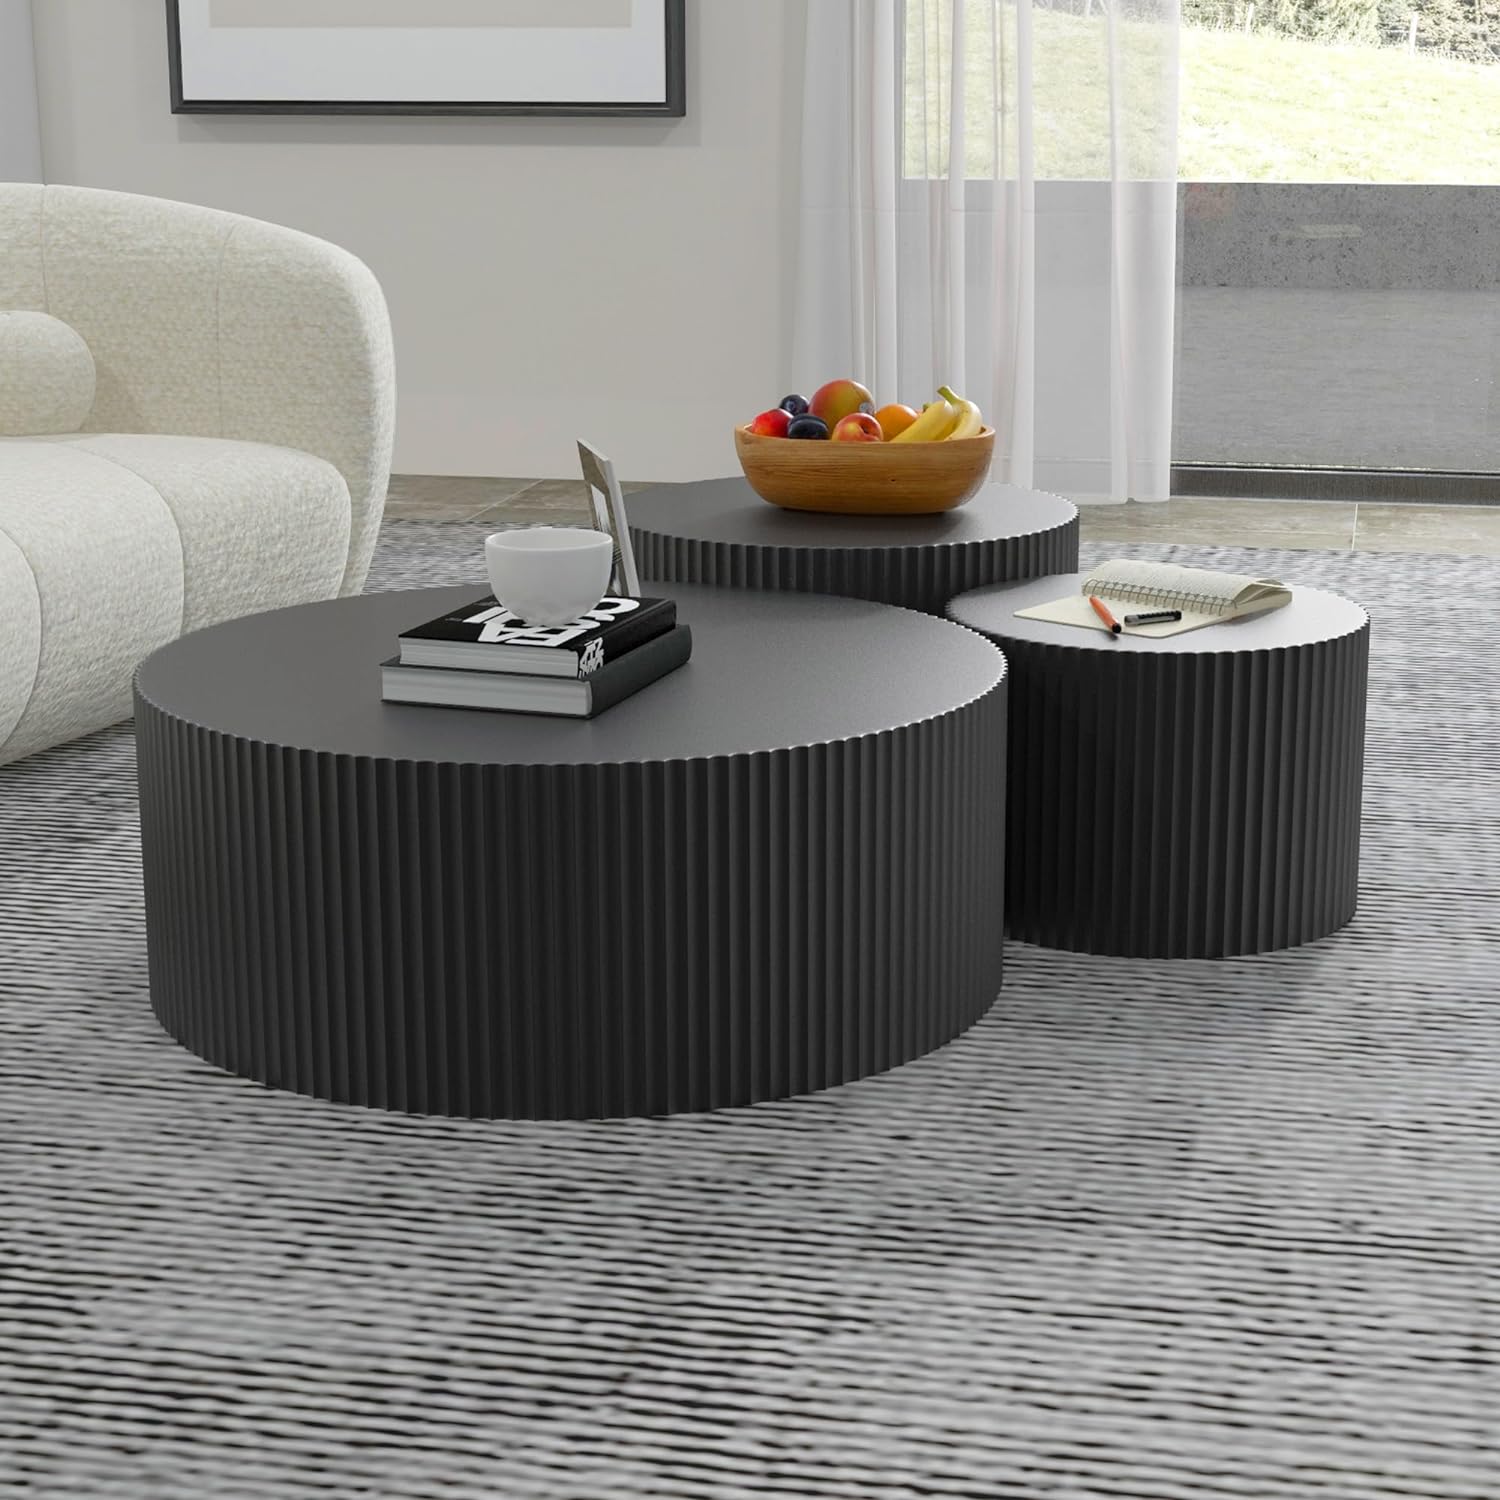 WILLIAMSPACE Black Round Coffee Table Set of 3, Modern Circle Wood Coffee Table Set, 3 Peice Nesting Coffee Accent Side Table End Table for Home Office, No Assembly (3 PCS, Black)